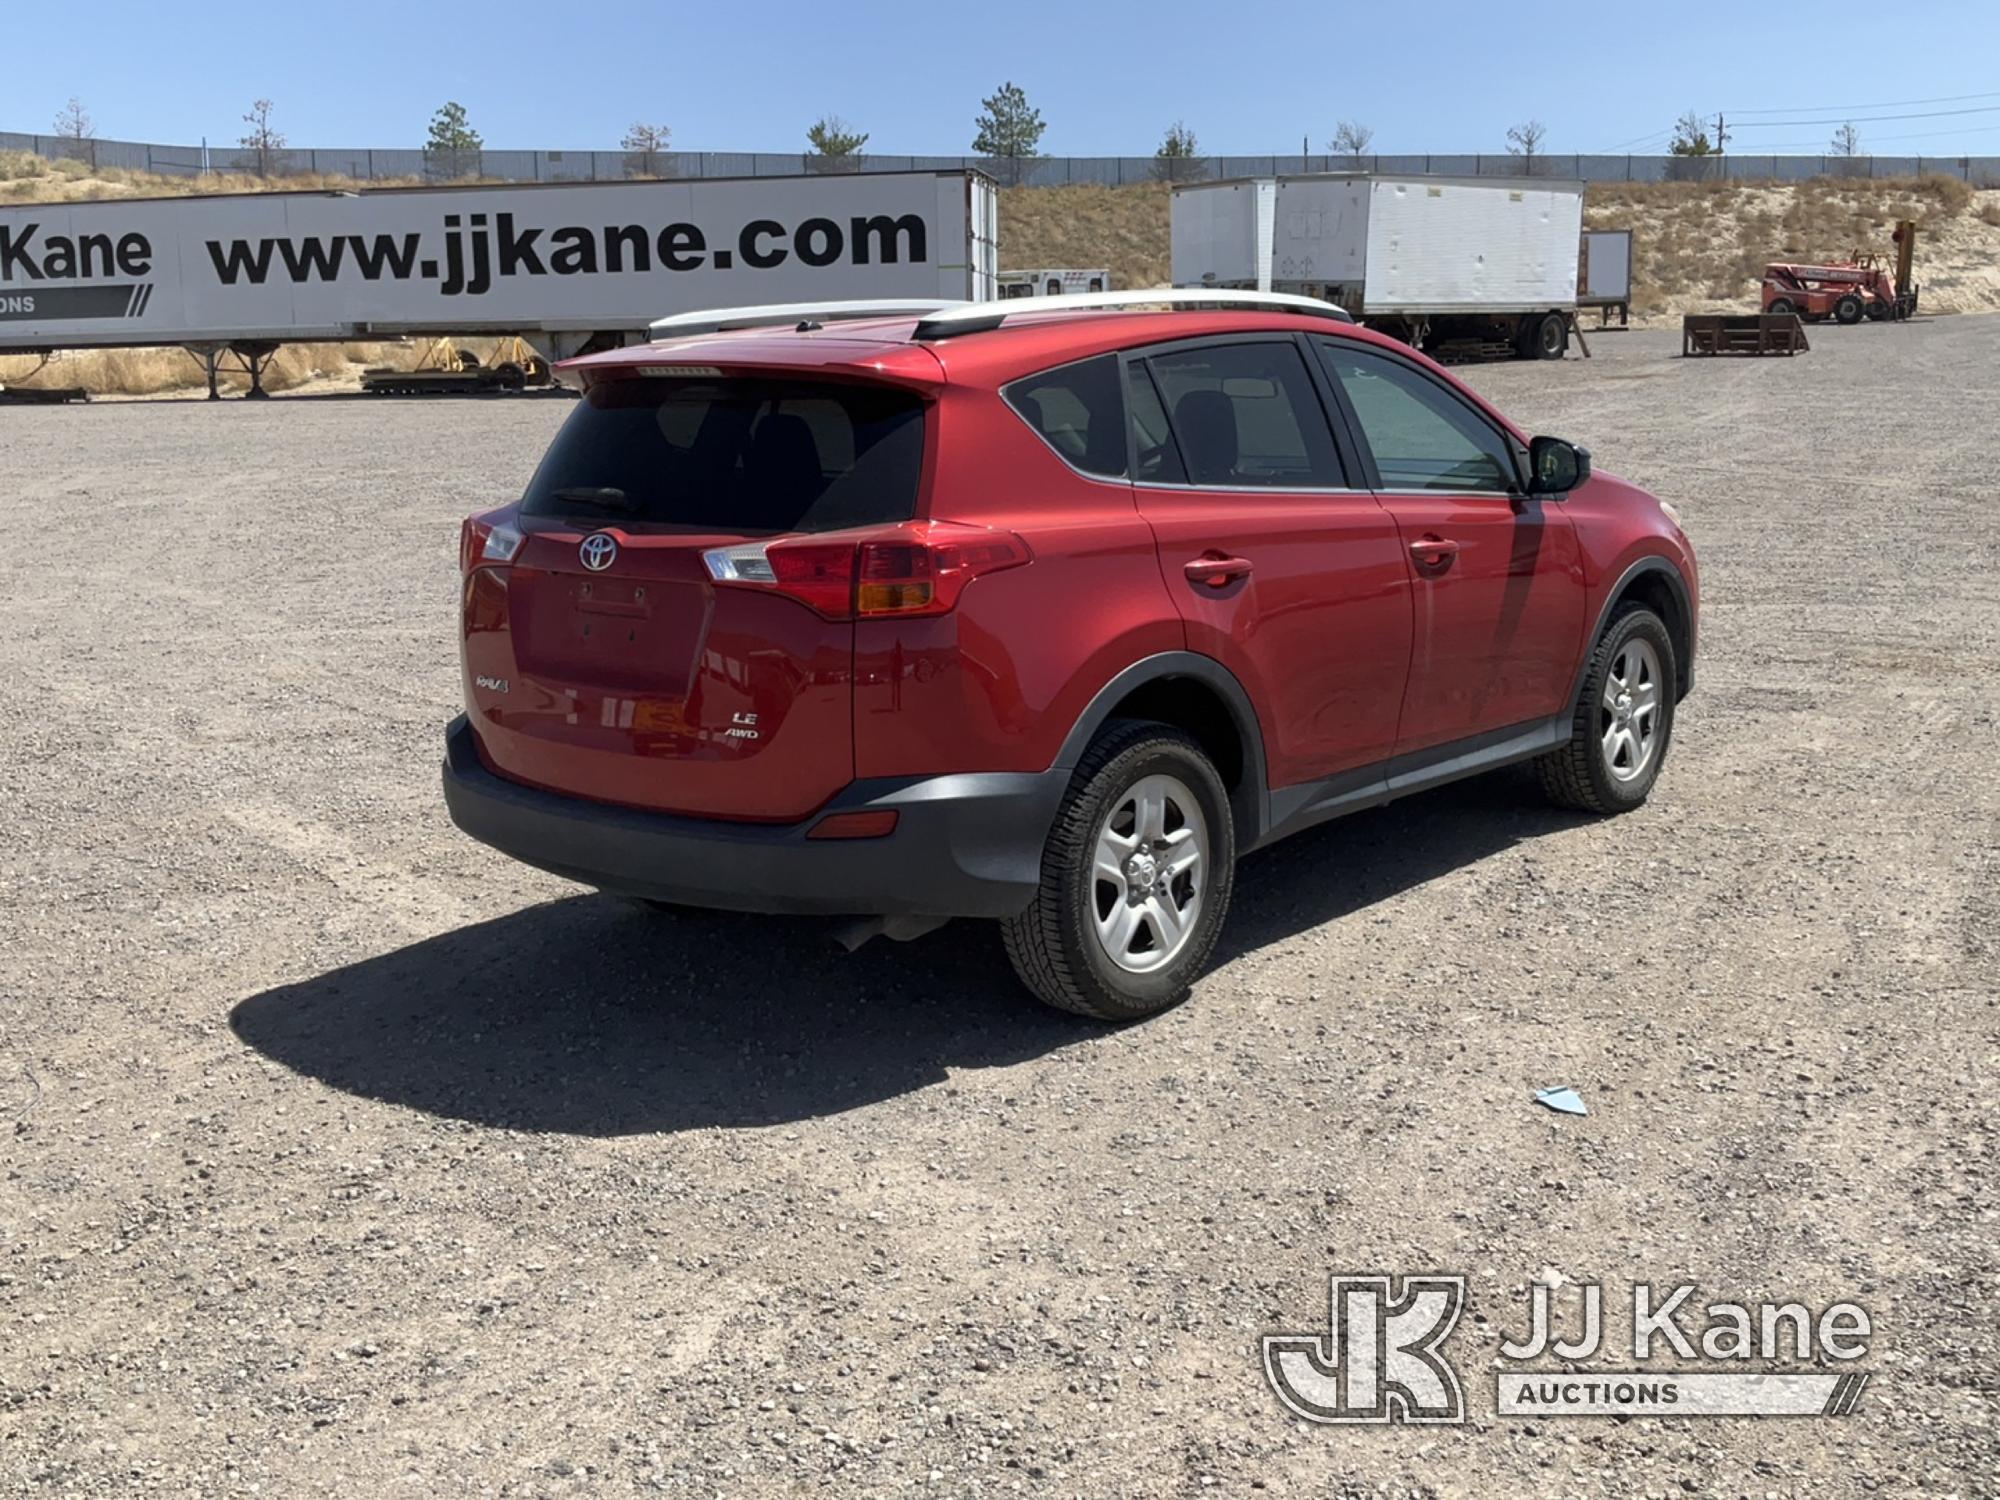 (McCarran, NV) 2013 Toyota RAV 4 Located In Reno Nv. Contact Nathan Tiedt To Preview 775-240-1030 Ru